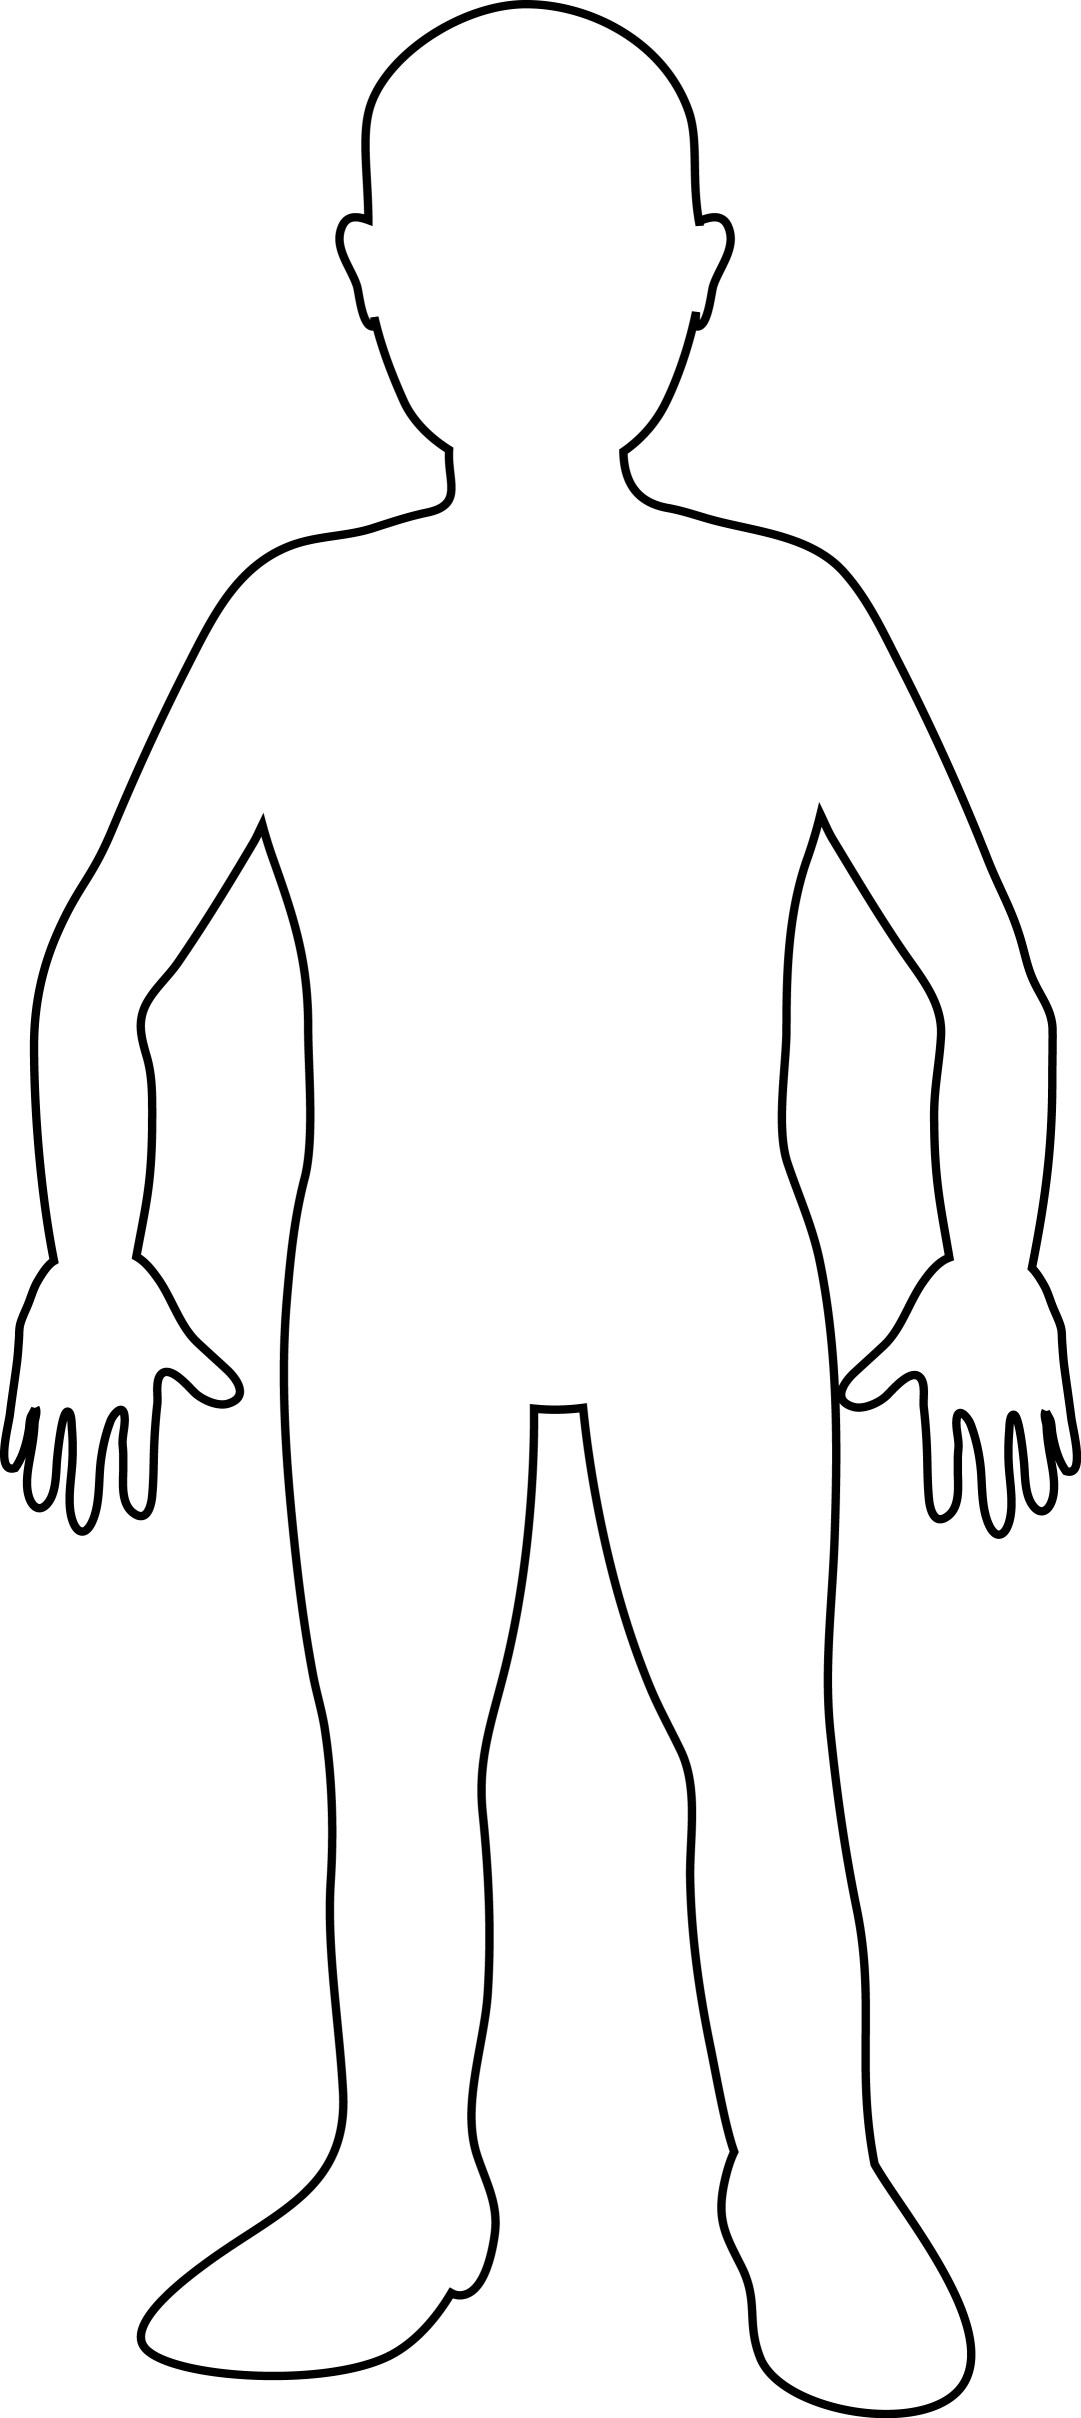 person-outline-coloring-page-cliparts-co